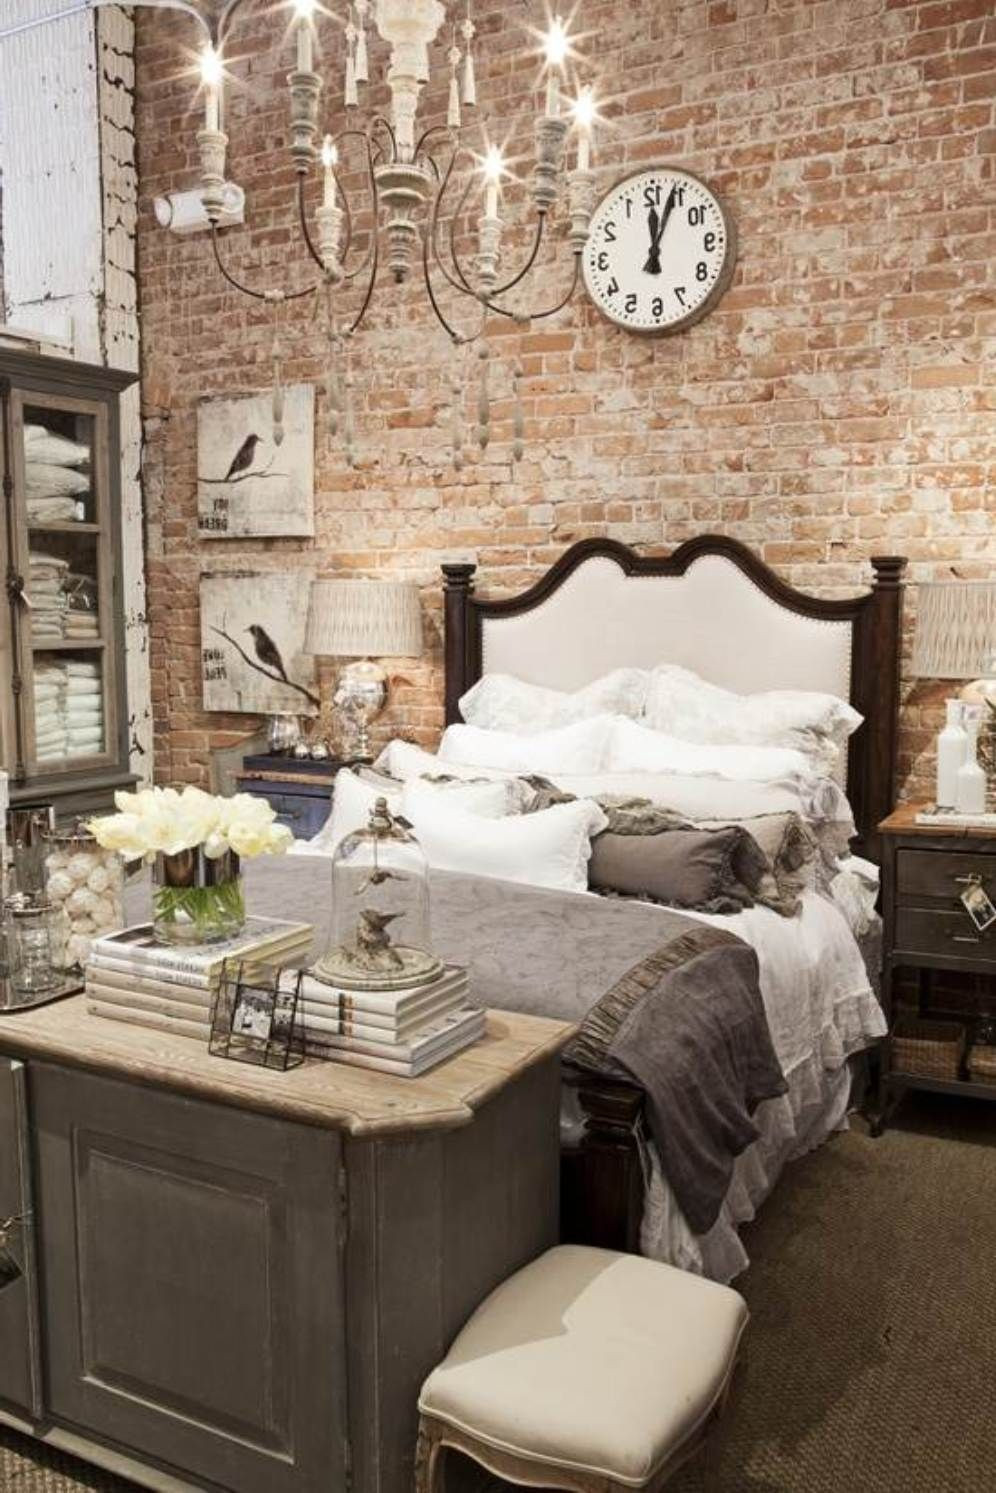 Brick Accent Wall Bedroom
 The Romantic Bedroom Ideas on a Bud